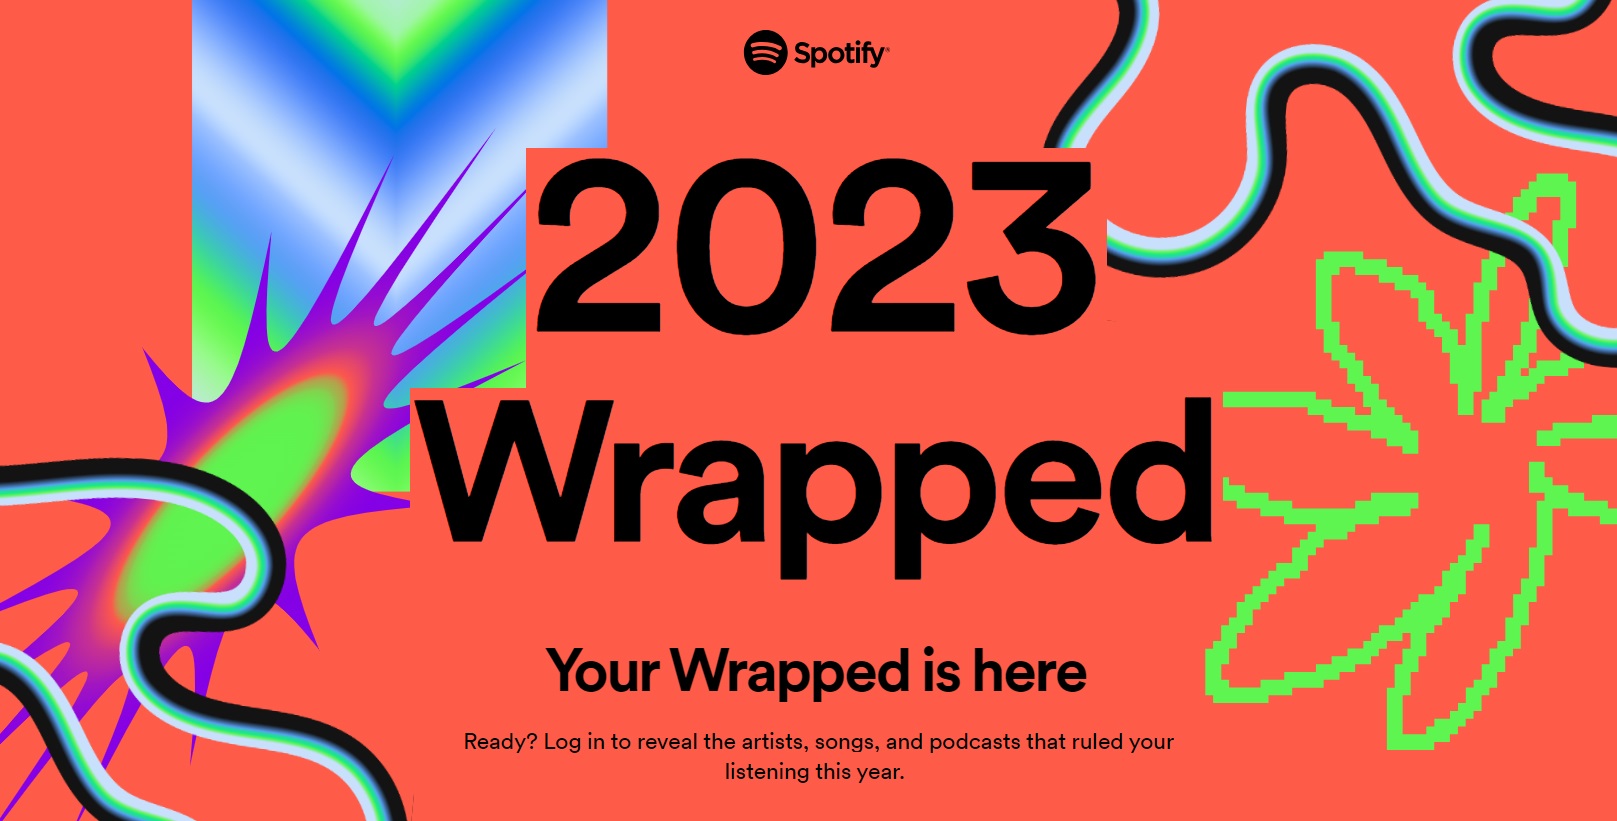 Spotify Wrapped 2023 is inaccurate for some users